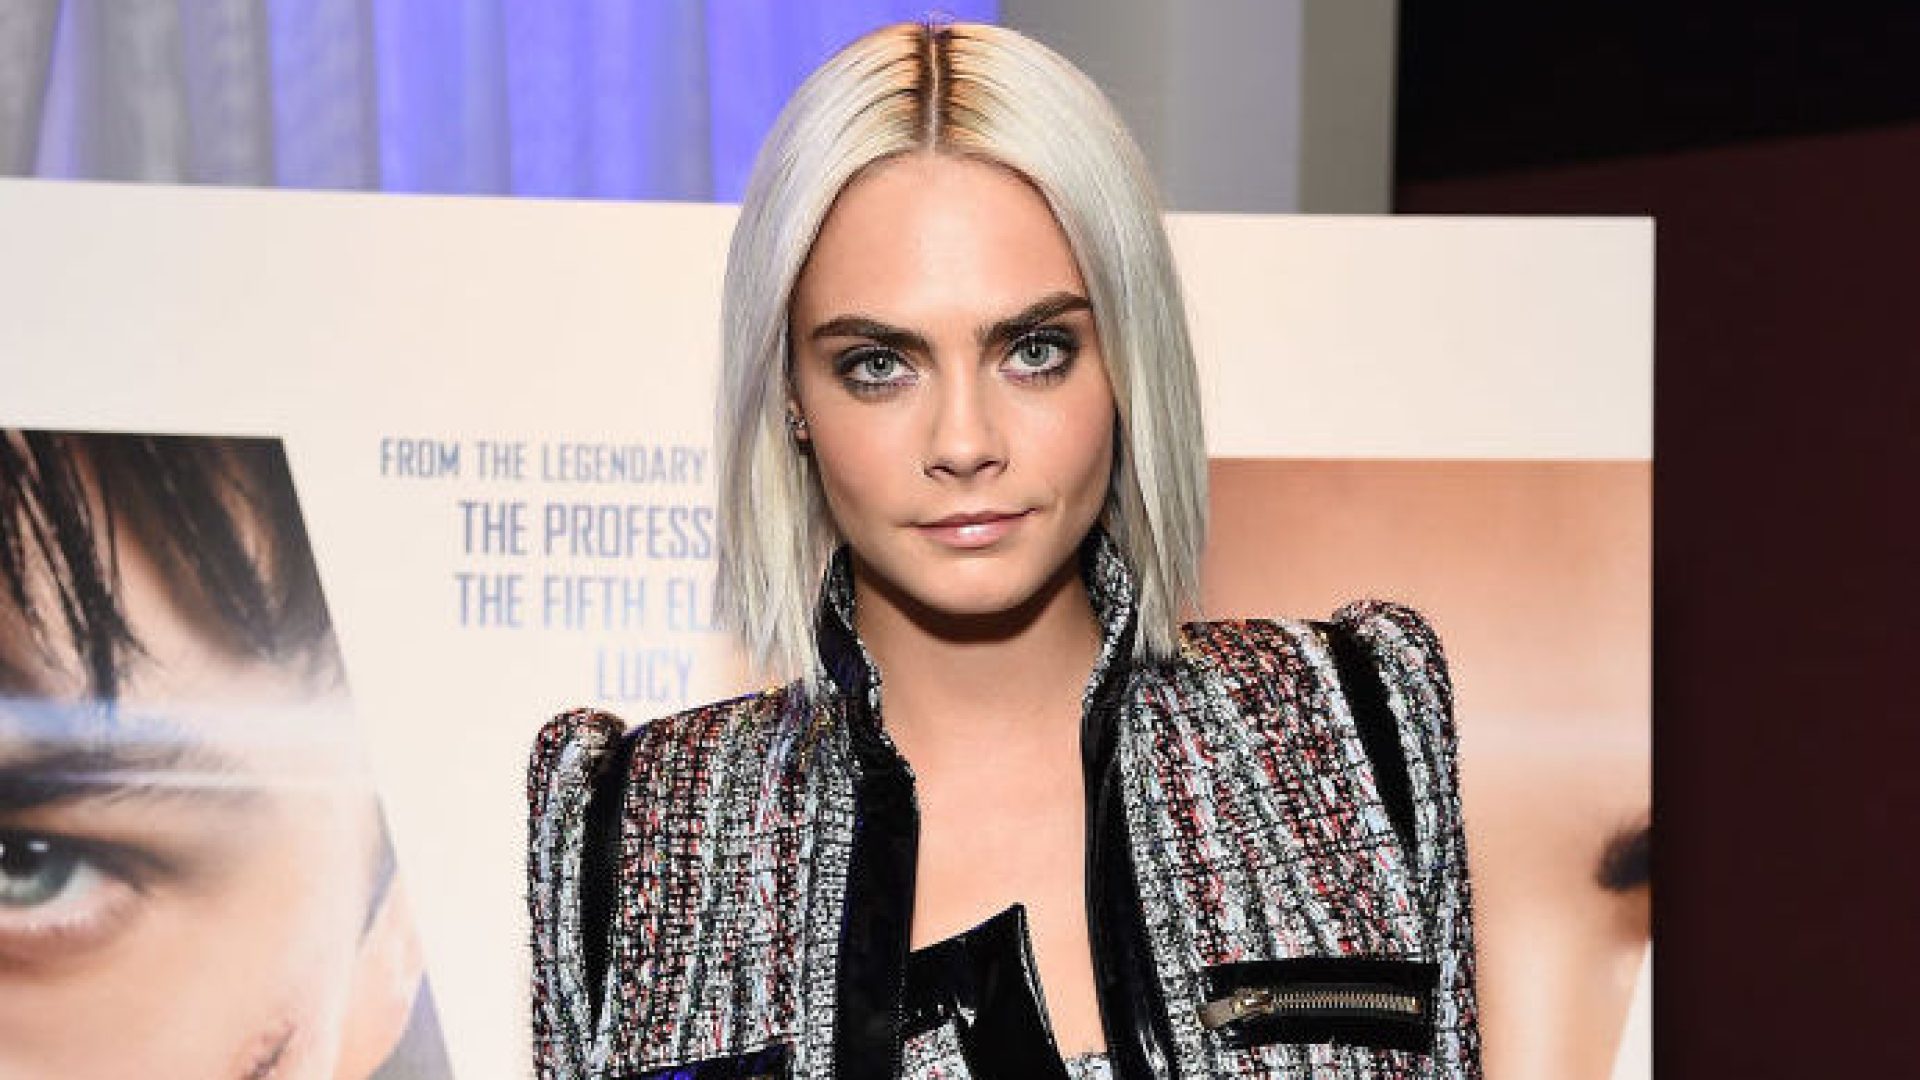 Cara Delevingne Drastically Dyed Her Hair Because She Will Soon Have To